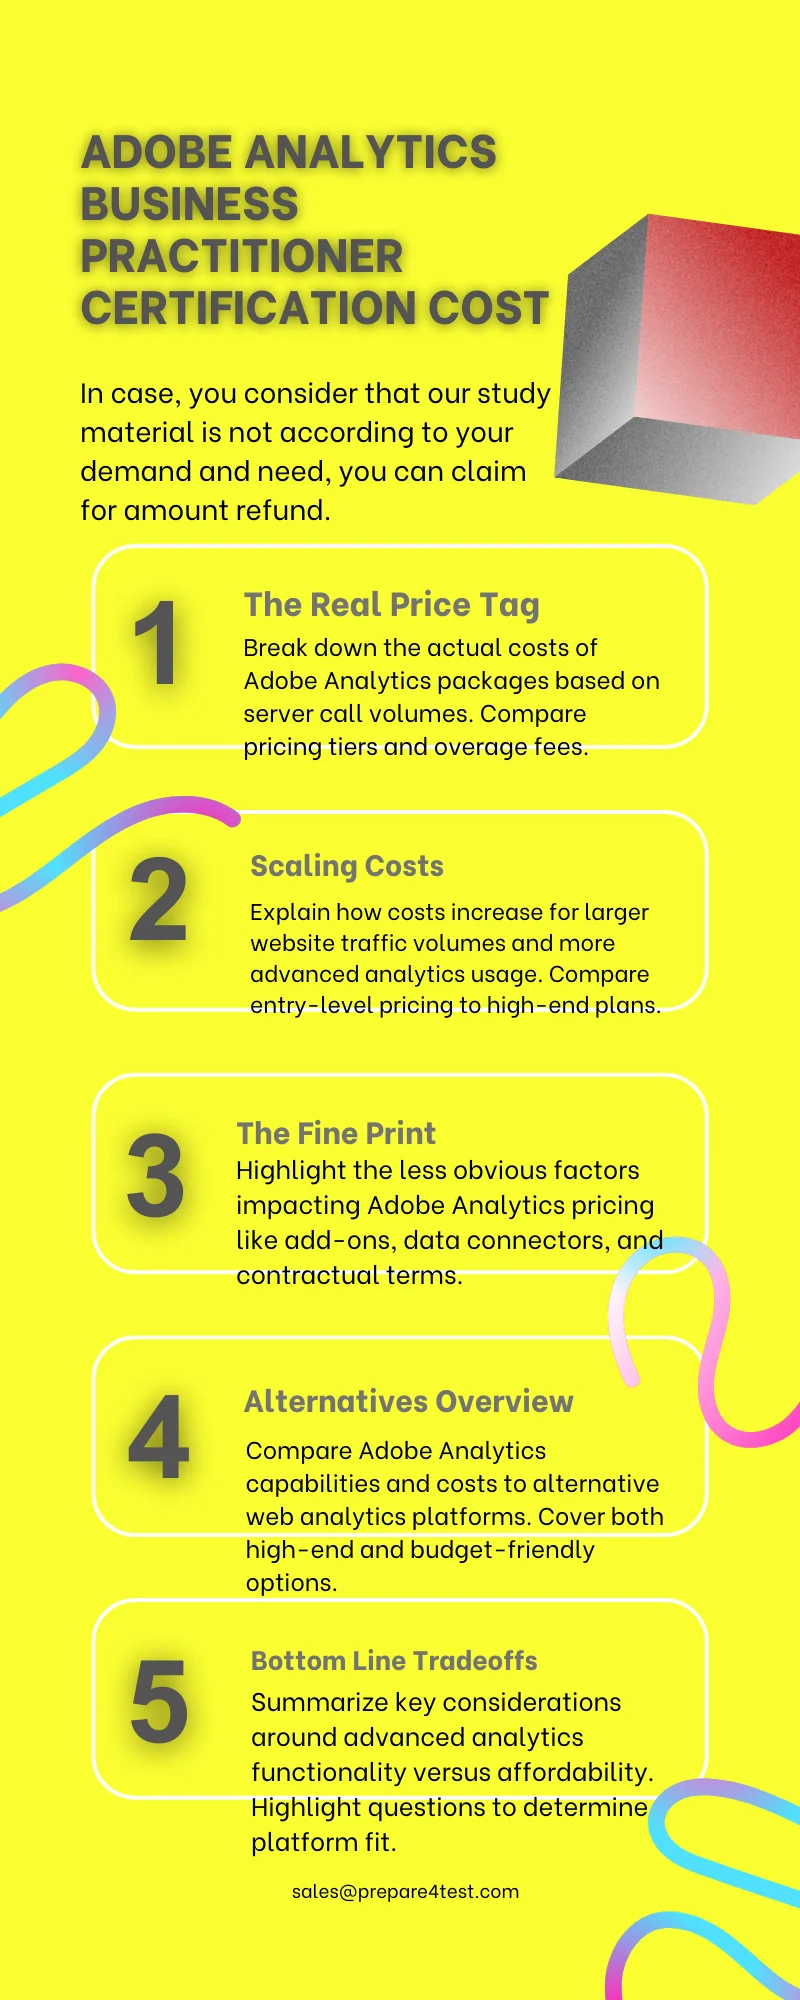 Adobe Analytics Business Practitioner Certification Cost Infographic